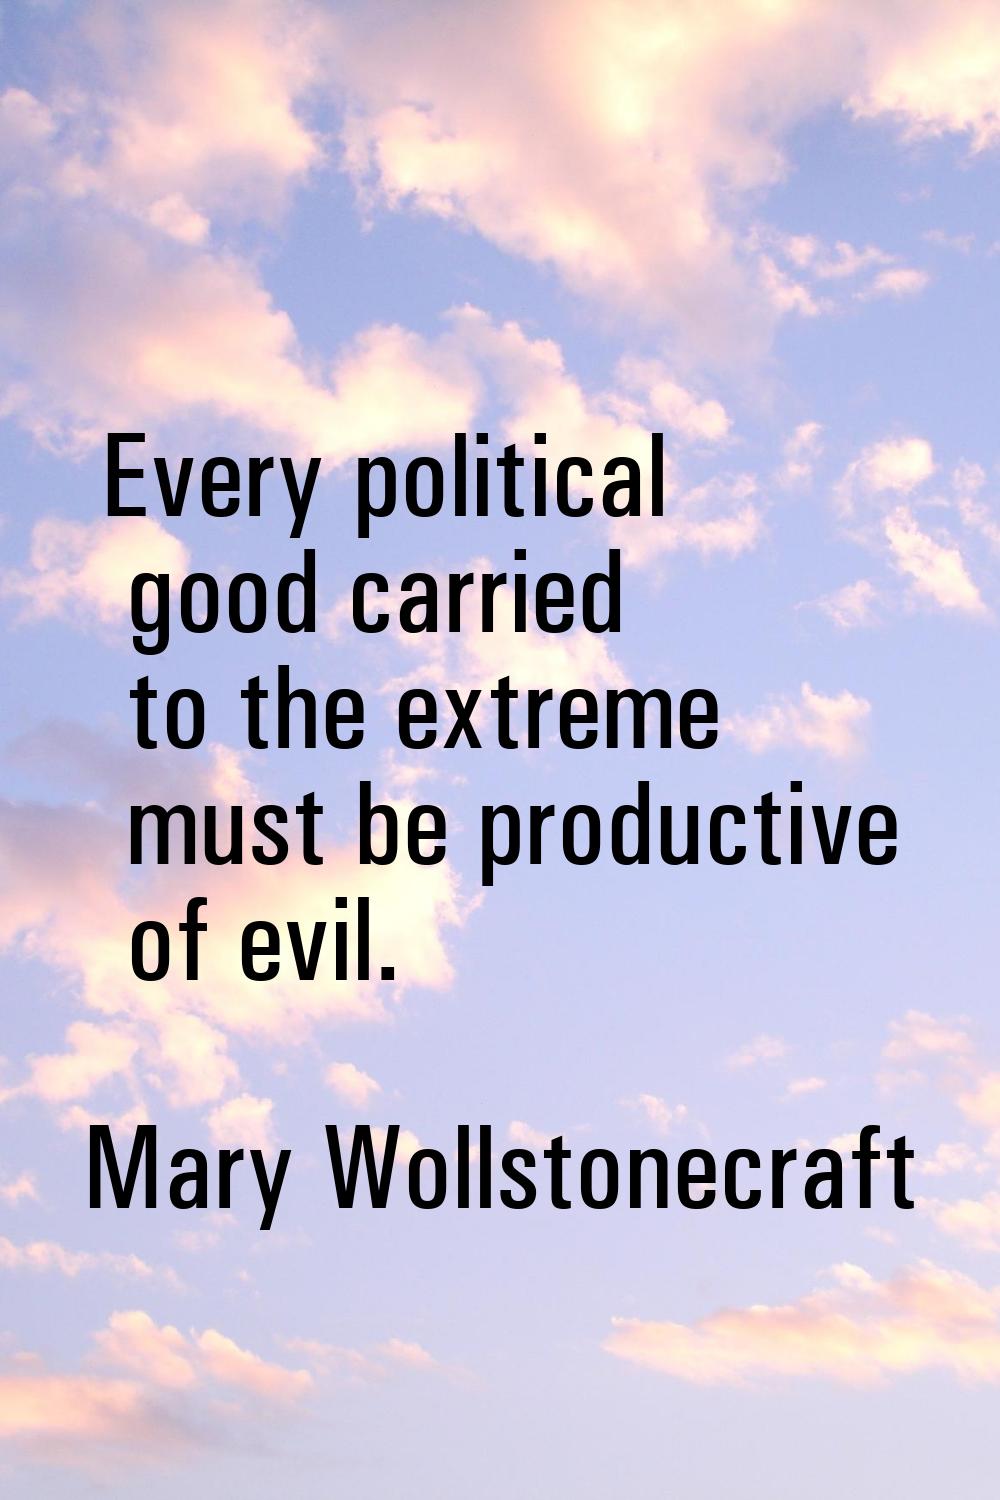 Every political good carried to the extreme must be productive of evil.